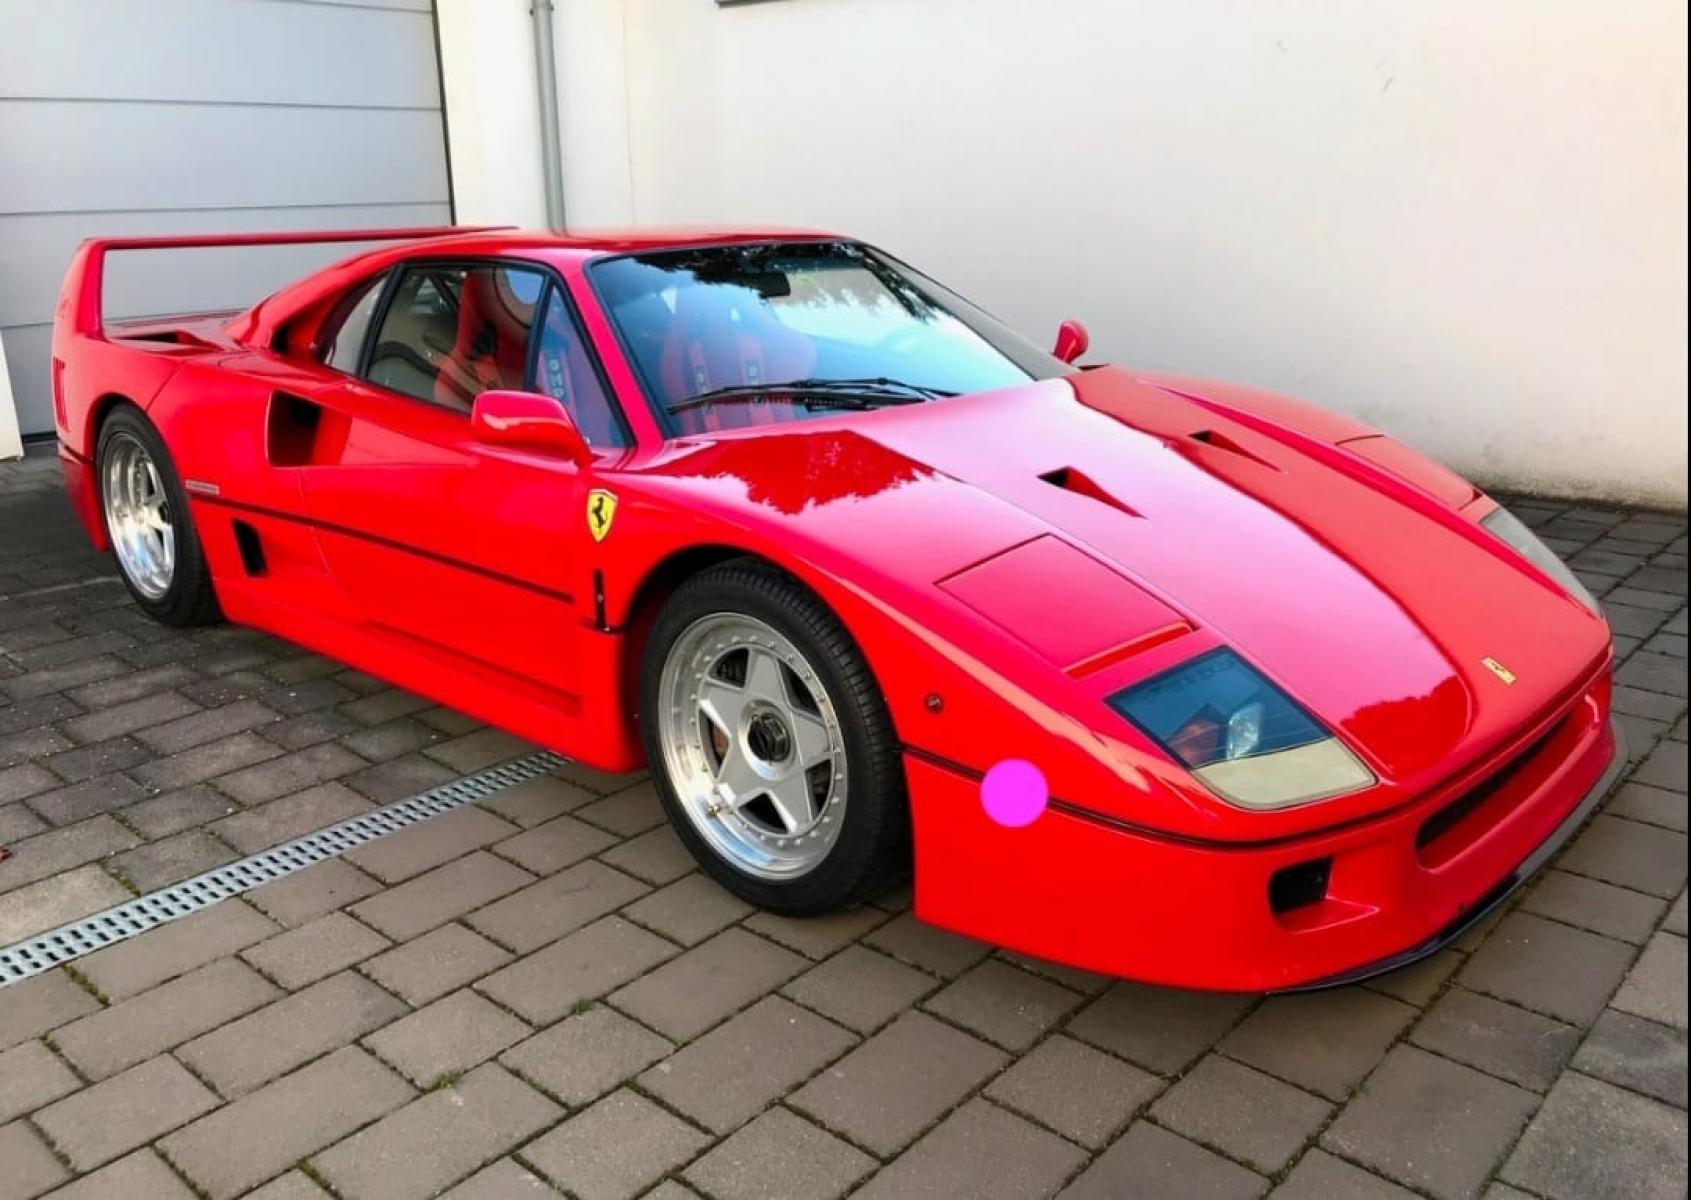 1991 Red /Red Ferrari F40 , 0.000000, 0.000000 - 1991 Ferrari F 40, Red, red interior, Fully restored, Original paint, European car Never been in an accident. Invoices available for servicing and upgrading for € 60'000.- EUR at Ferrari. 27'000 Km - Photo #0